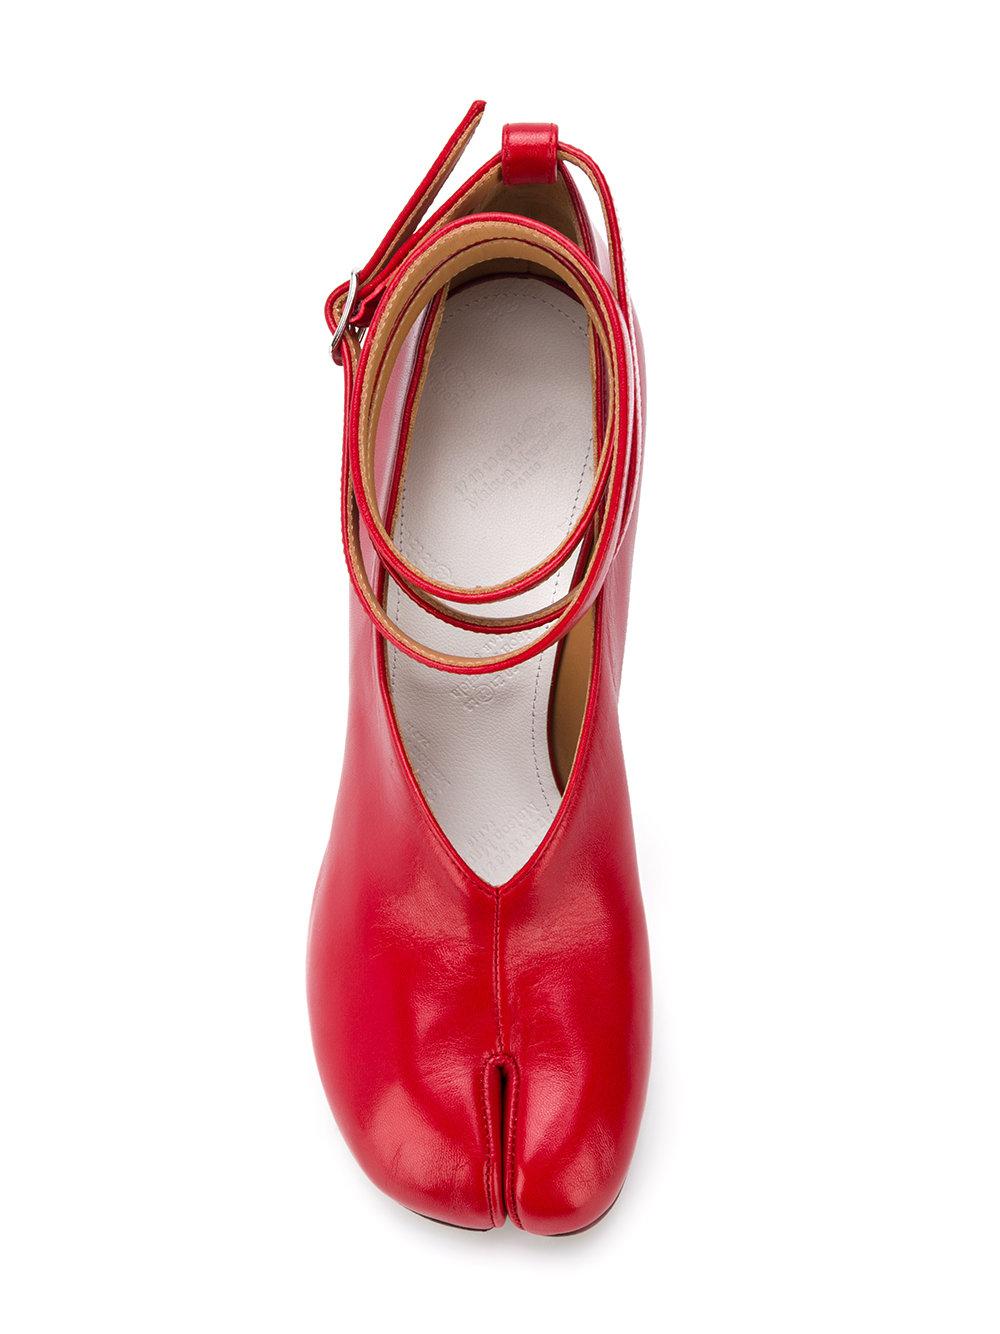 Maison Margiela Leather Tabi Mary Jane Pumps in Red - Lyst